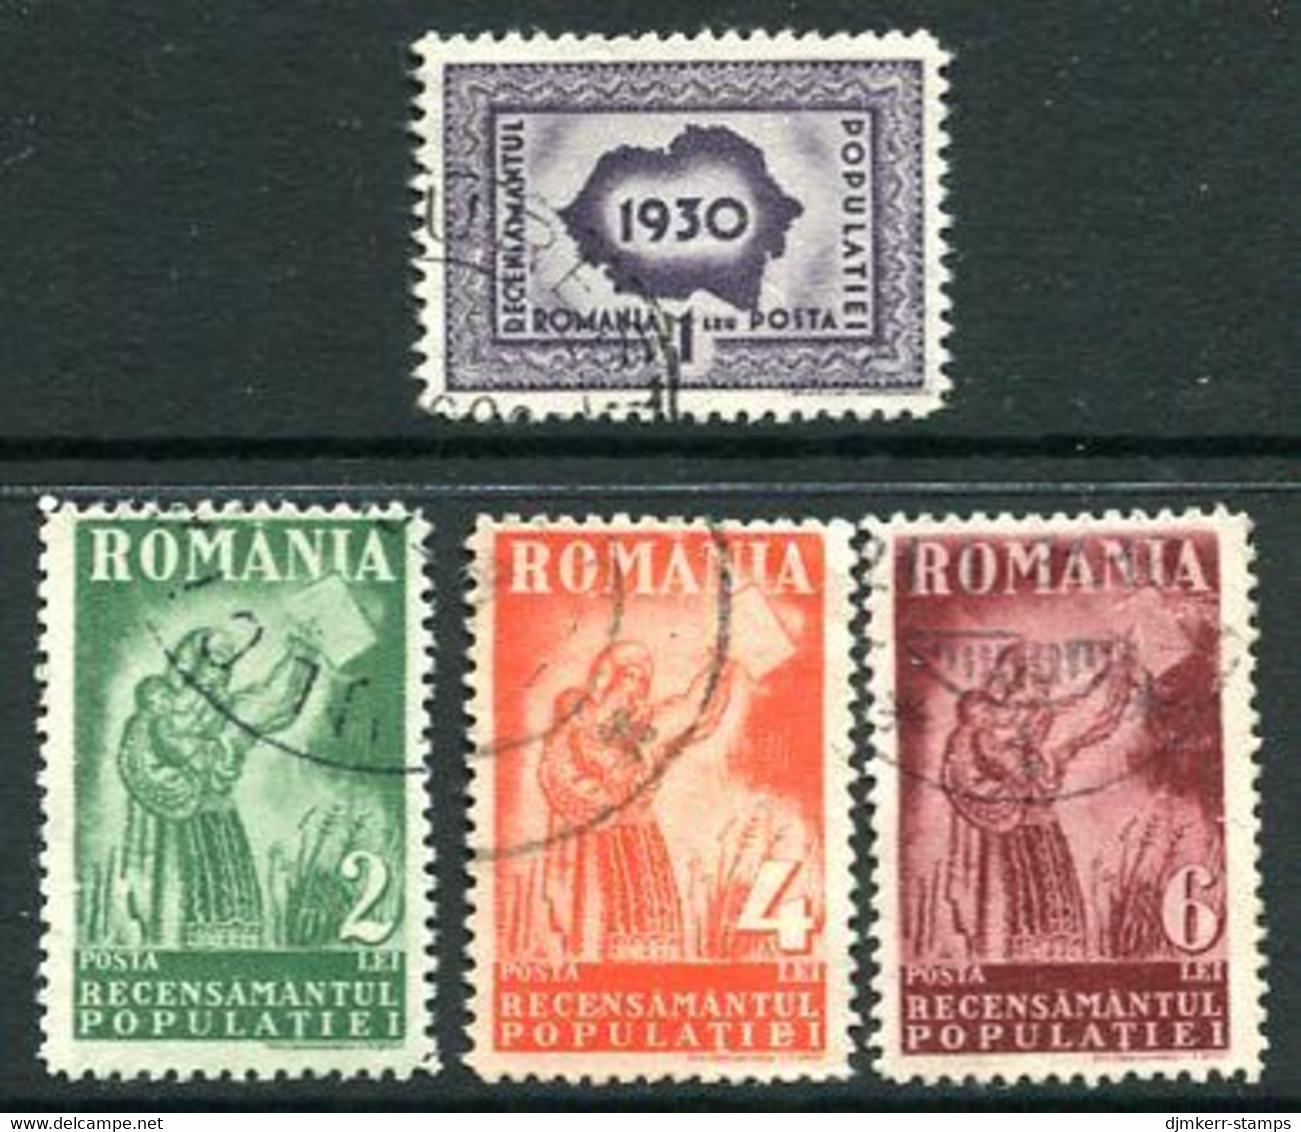 ROMANIA 1930 National Census Used   Michel 393-96 - Used Stamps